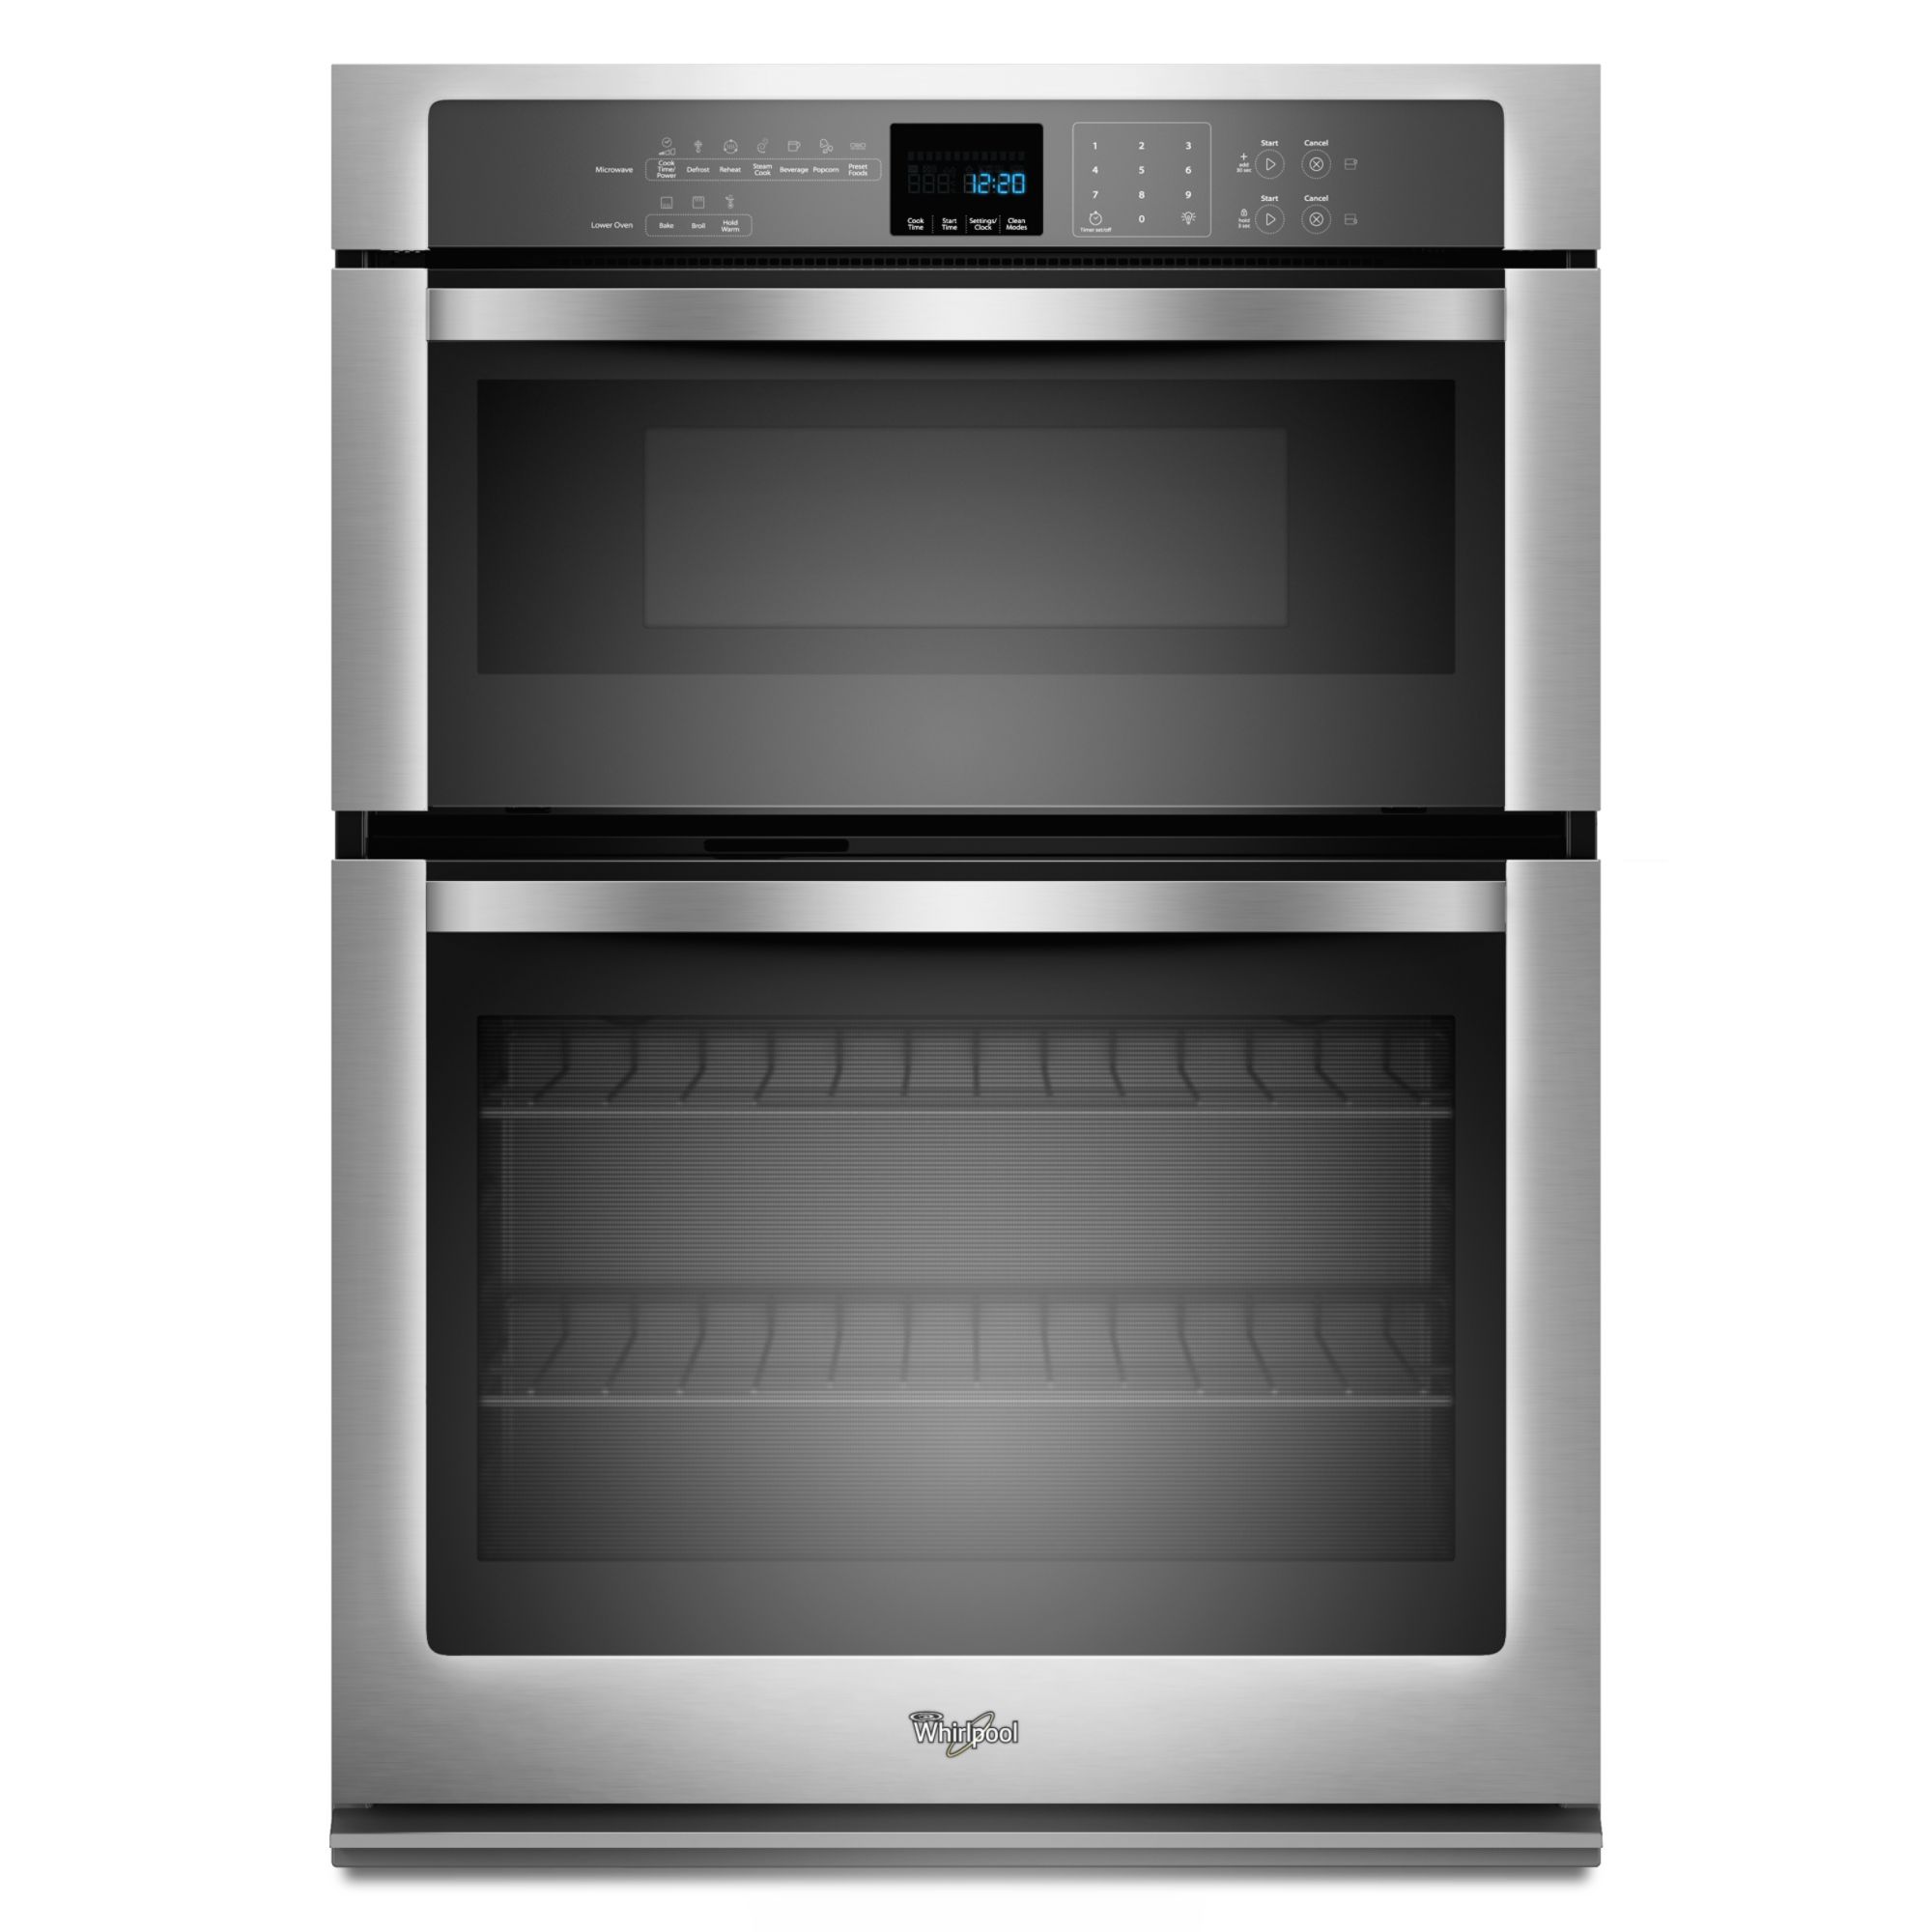 27" Electric Built-In Oven/Microwave Combo logo